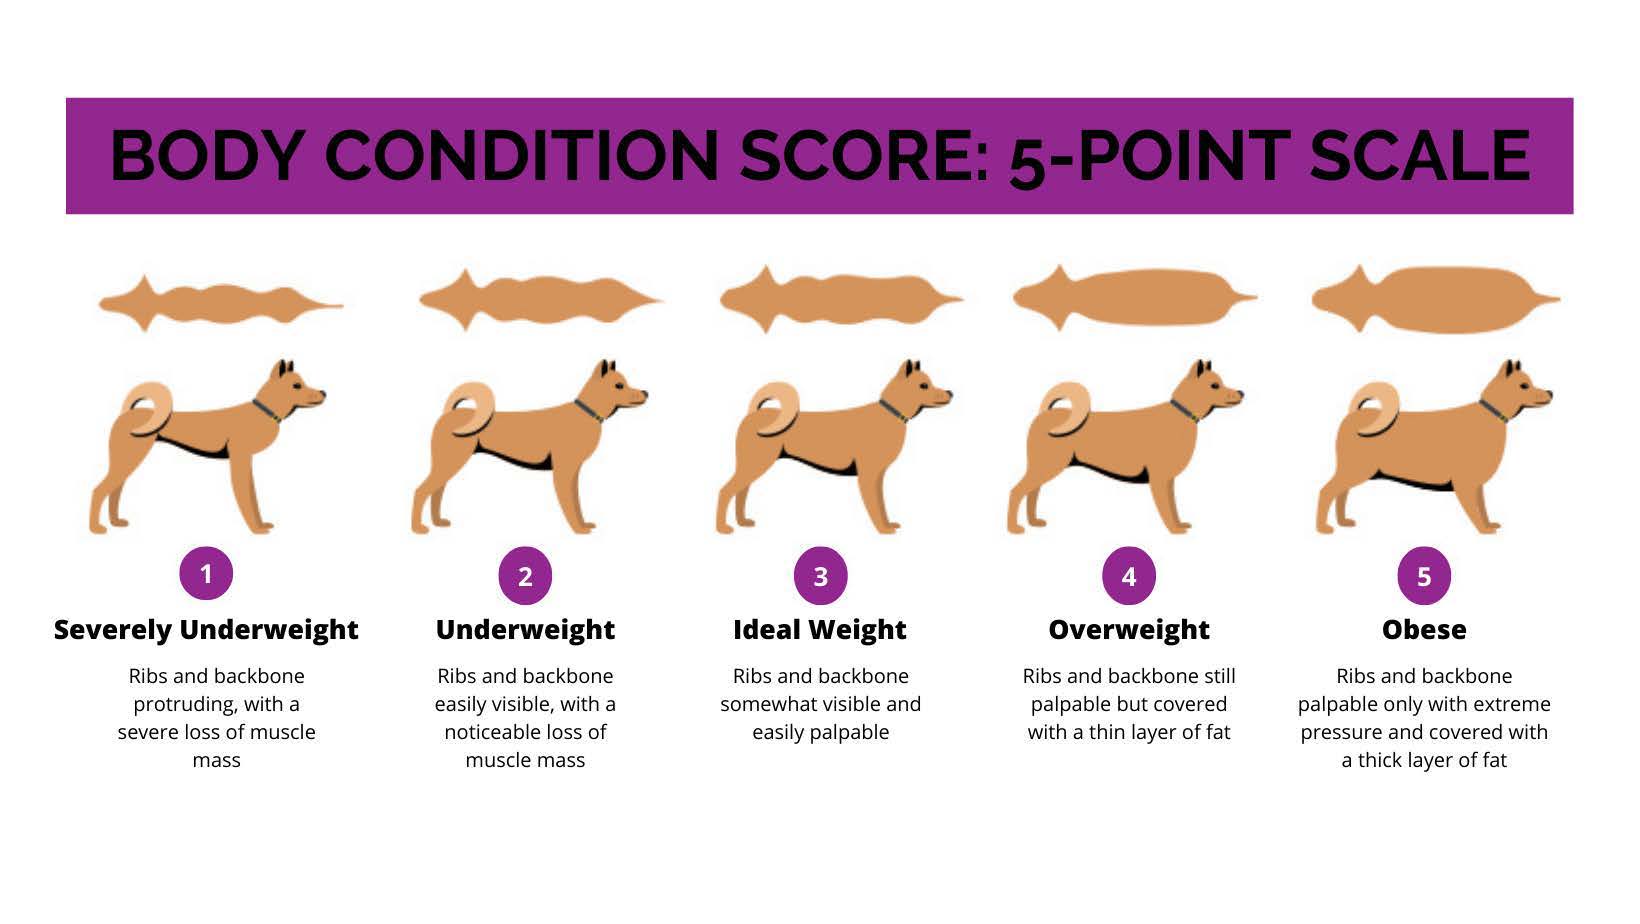 Body condition score is a 5-point scale that can help to assess a dog’s general welfare based on its fat and muscle coverage. The scale includes: (1) Severely underweight – ribs and backbone protruding, with a severe loss of muscle mass. (2) Underweight - ribs and backbone easily visible, with a noticeable loss of muscle mass B. (3) Ideal Weight – Ribs and backbone somewhat visible and easily palpable. (4) Overweight - Ribs and backbone still palpable but covered with a thin layer of fat. (5) Obese - Ribs and backbone palpable only with extreme pressure and covered with a thick layer of fat.